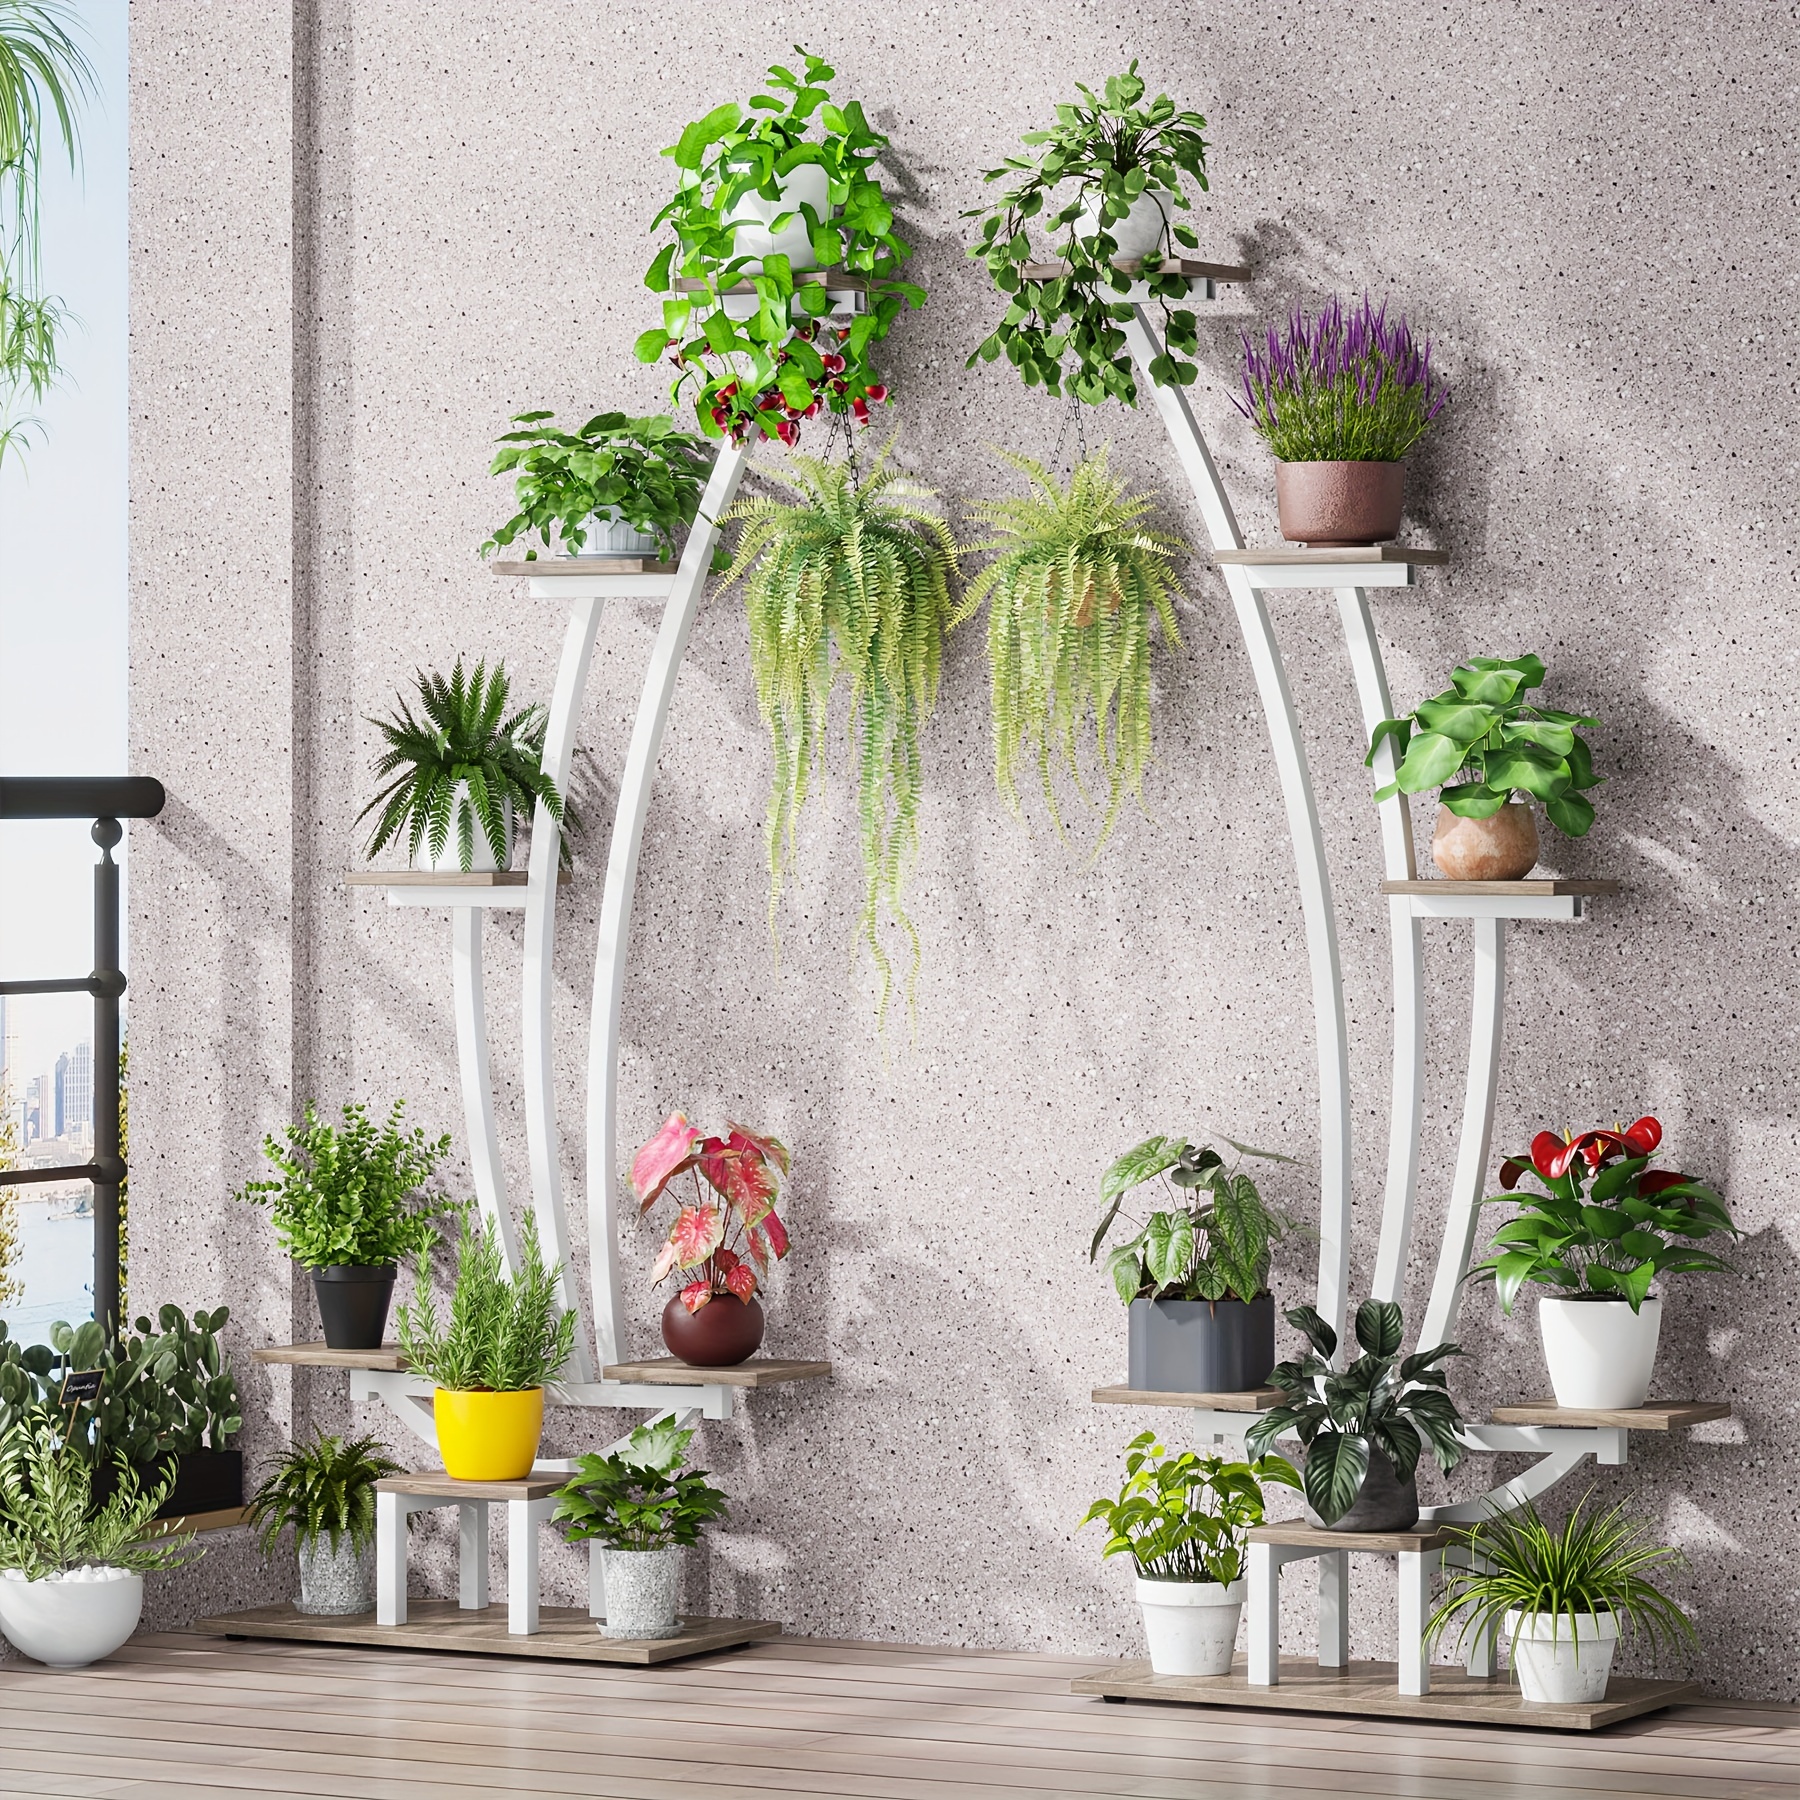 

Little Tree 6 Tier Metal Plant Stand Indoor Pack Of 2, 60" Half Moon Plant Shelf, Multi-purpose Curved Plant Flower Display Holder Pot Rack For Balcony Living Room